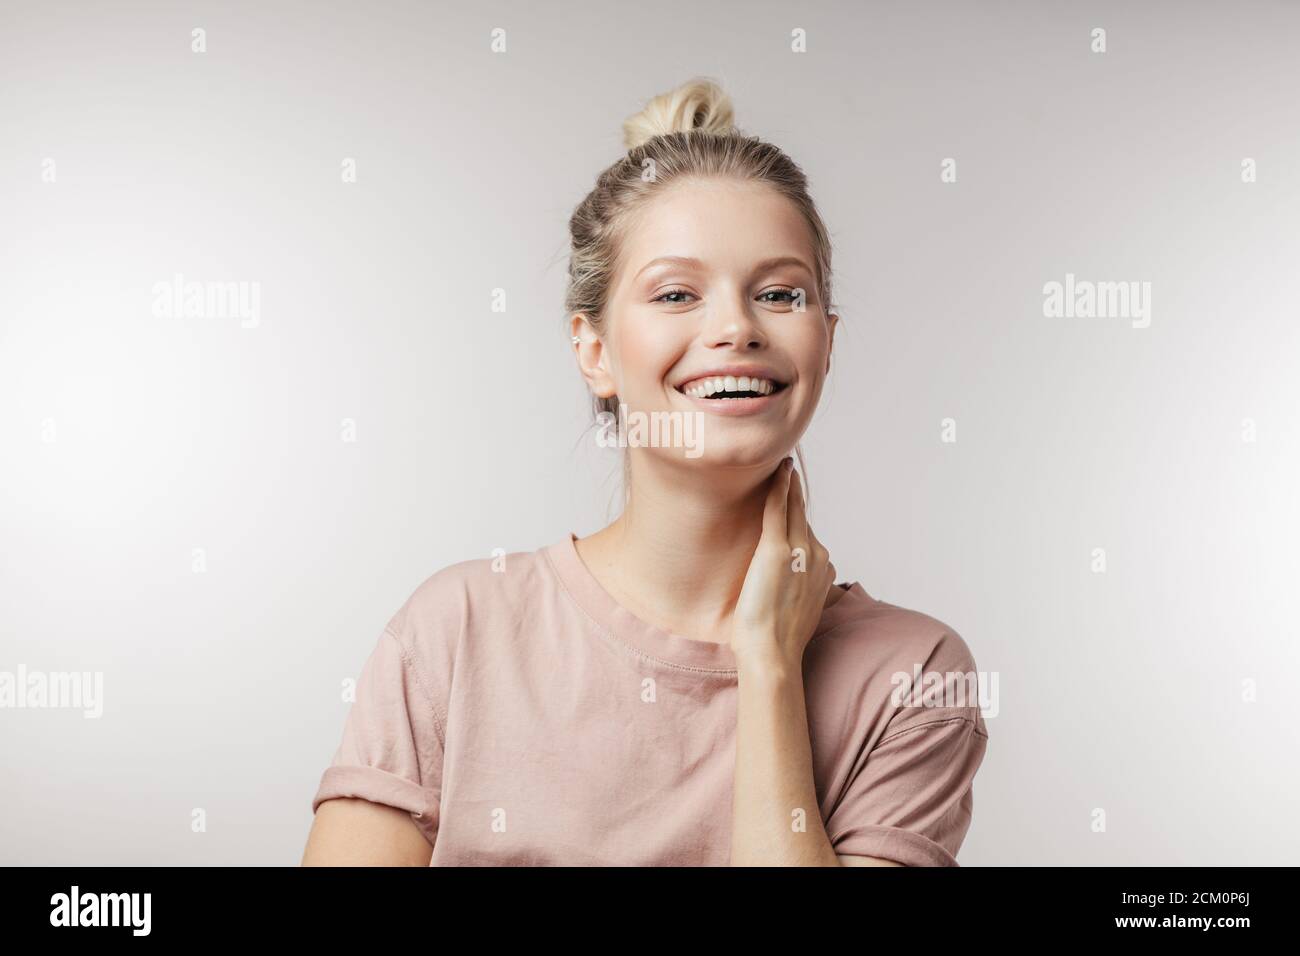 Positive attractive young woman casually dressed, with hair tired in knot, smiling at camera over white background with copyspace for advertisement. Stock Photo